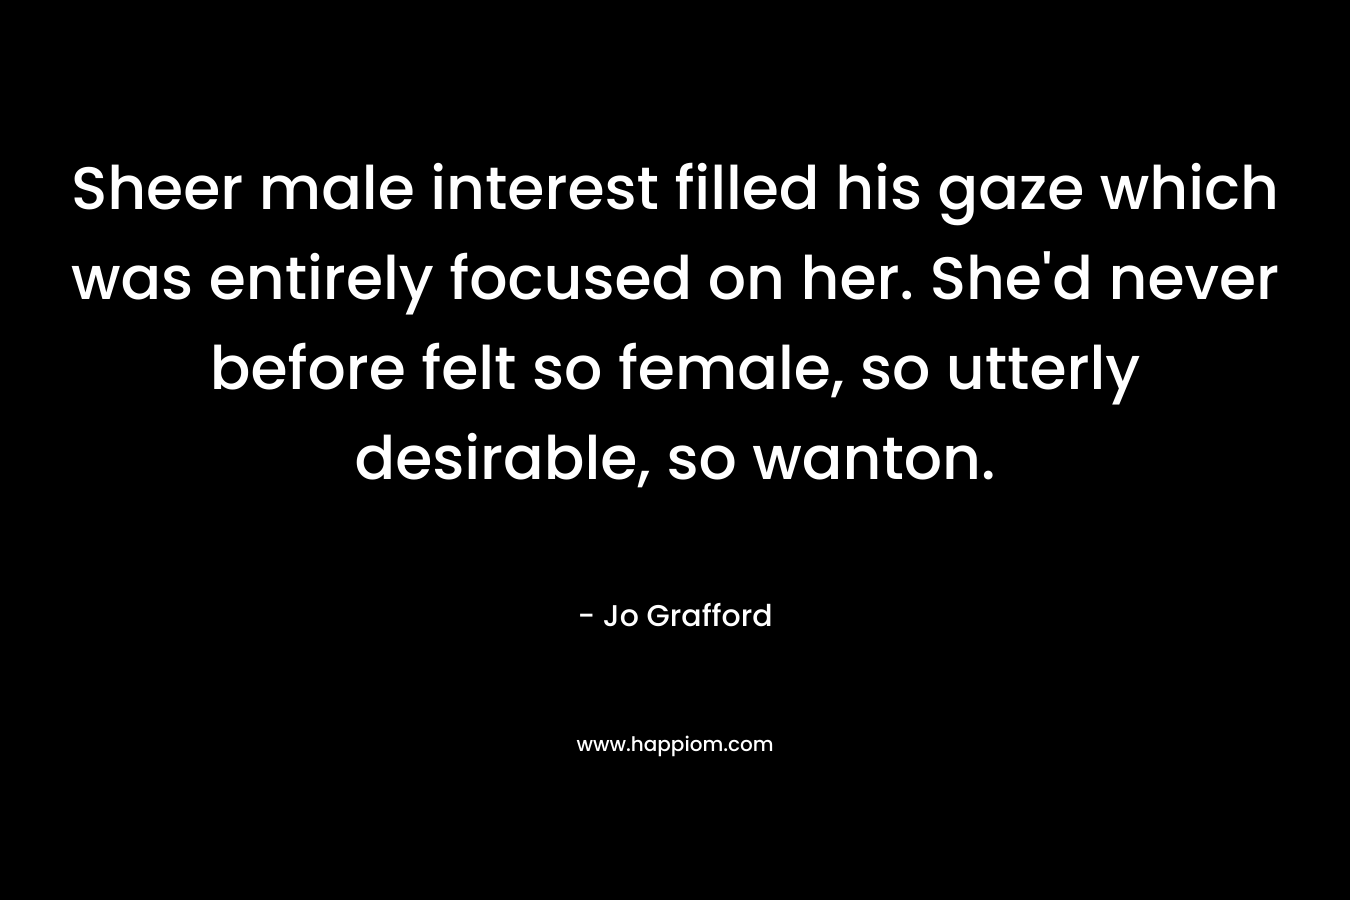 Sheer male interest filled his gaze which was entirely focused on her. She'd never before felt so female, so utterly desirable, so wanton.